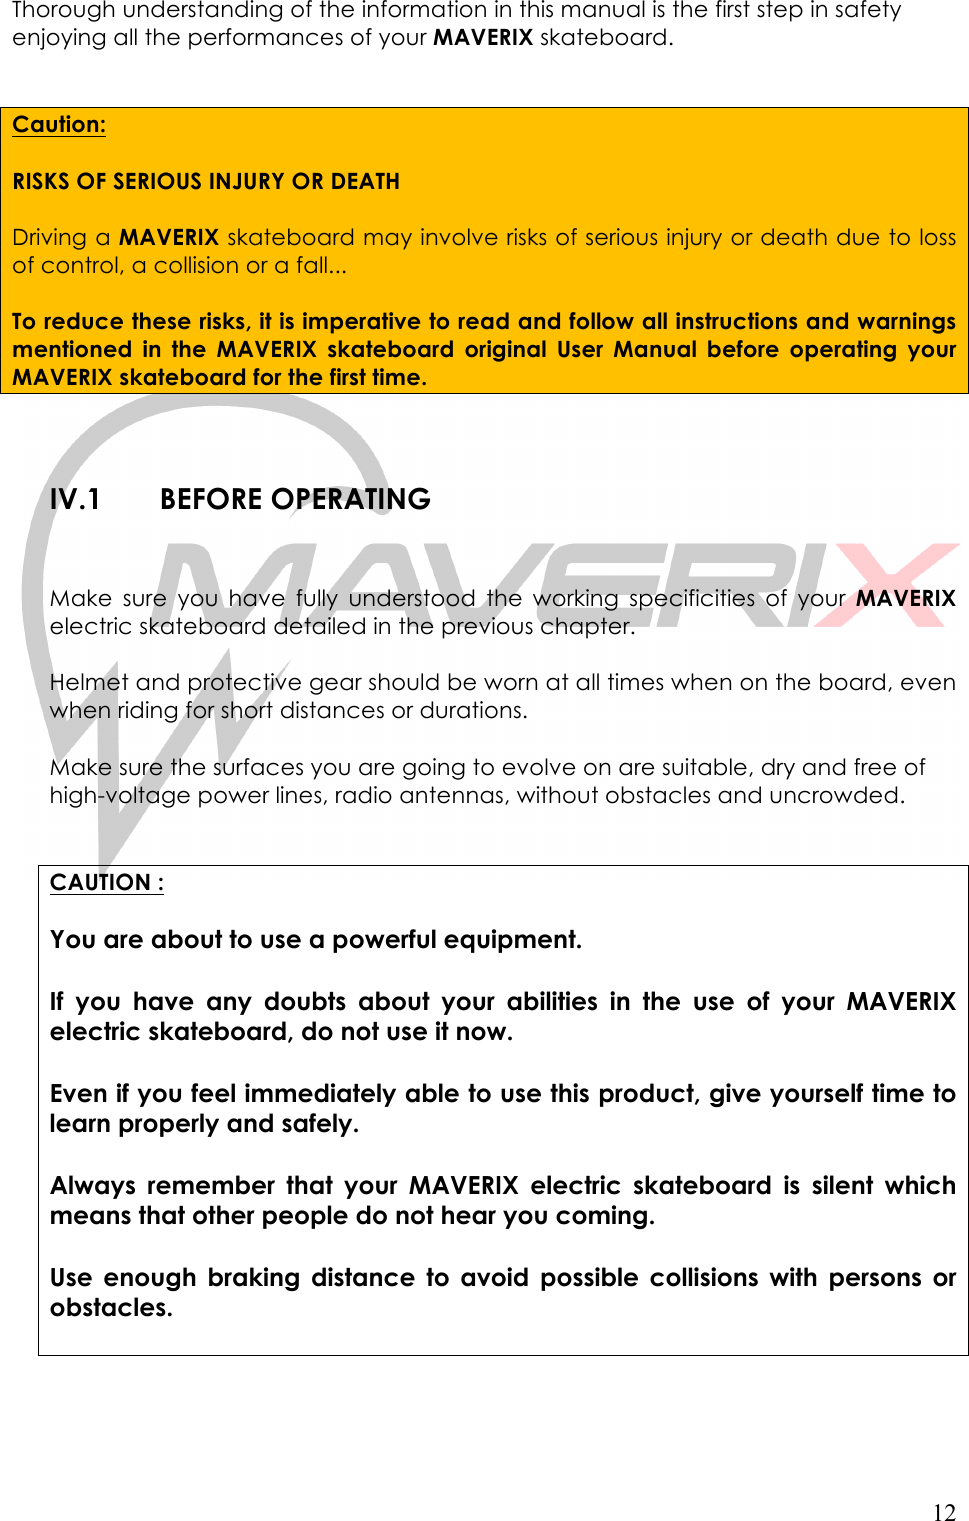   12 Thorough understanding of the information in this manual is the first step in safety enjoying all the performances of your MAVERIX skateboard.    Caution:  RISKS OF SERIOUS INJURY OR DEATH  Driving a MAVERIX skateboard may involve risks of serious injury or death due to loss of control, a collision or a fall...  To reduce these risks, it is imperative to read and follow all instructions and warnings mentioned  in the  MAVERIX  skateboard  original  User  Manual  before  operating your MAVERIX skateboard for the first time.   IV.1 BEFORE OPERATING   Make  sure  you  have  fully  understood  the  working  specificities of  your  MAVERIX electric skateboard detailed in the previous chapter.  Helmet and protective gear should be worn at all times when on the board, even when riding for short distances or durations.   Make sure the surfaces you are going to evolve on are suitable, dry and free of high-voltage power lines, radio antennas, without obstacles and uncrowded.   CAUTION :  You are about to use a powerful equipment.   If you  have  any  doubts  about  your  abilities  in  the  use  of  your  MAVERIX electric skateboard, do not use it now.  Even if you feel immediately able to use this product, give yourself time to learn properly and safely.  Always  remember  that  your  MAVERIX  electric  skateboard is  silent  which means that other people do not hear you coming.  Use  enough  braking  distance  to  avoid  possible  collisions  with  persons  or obstacles.    